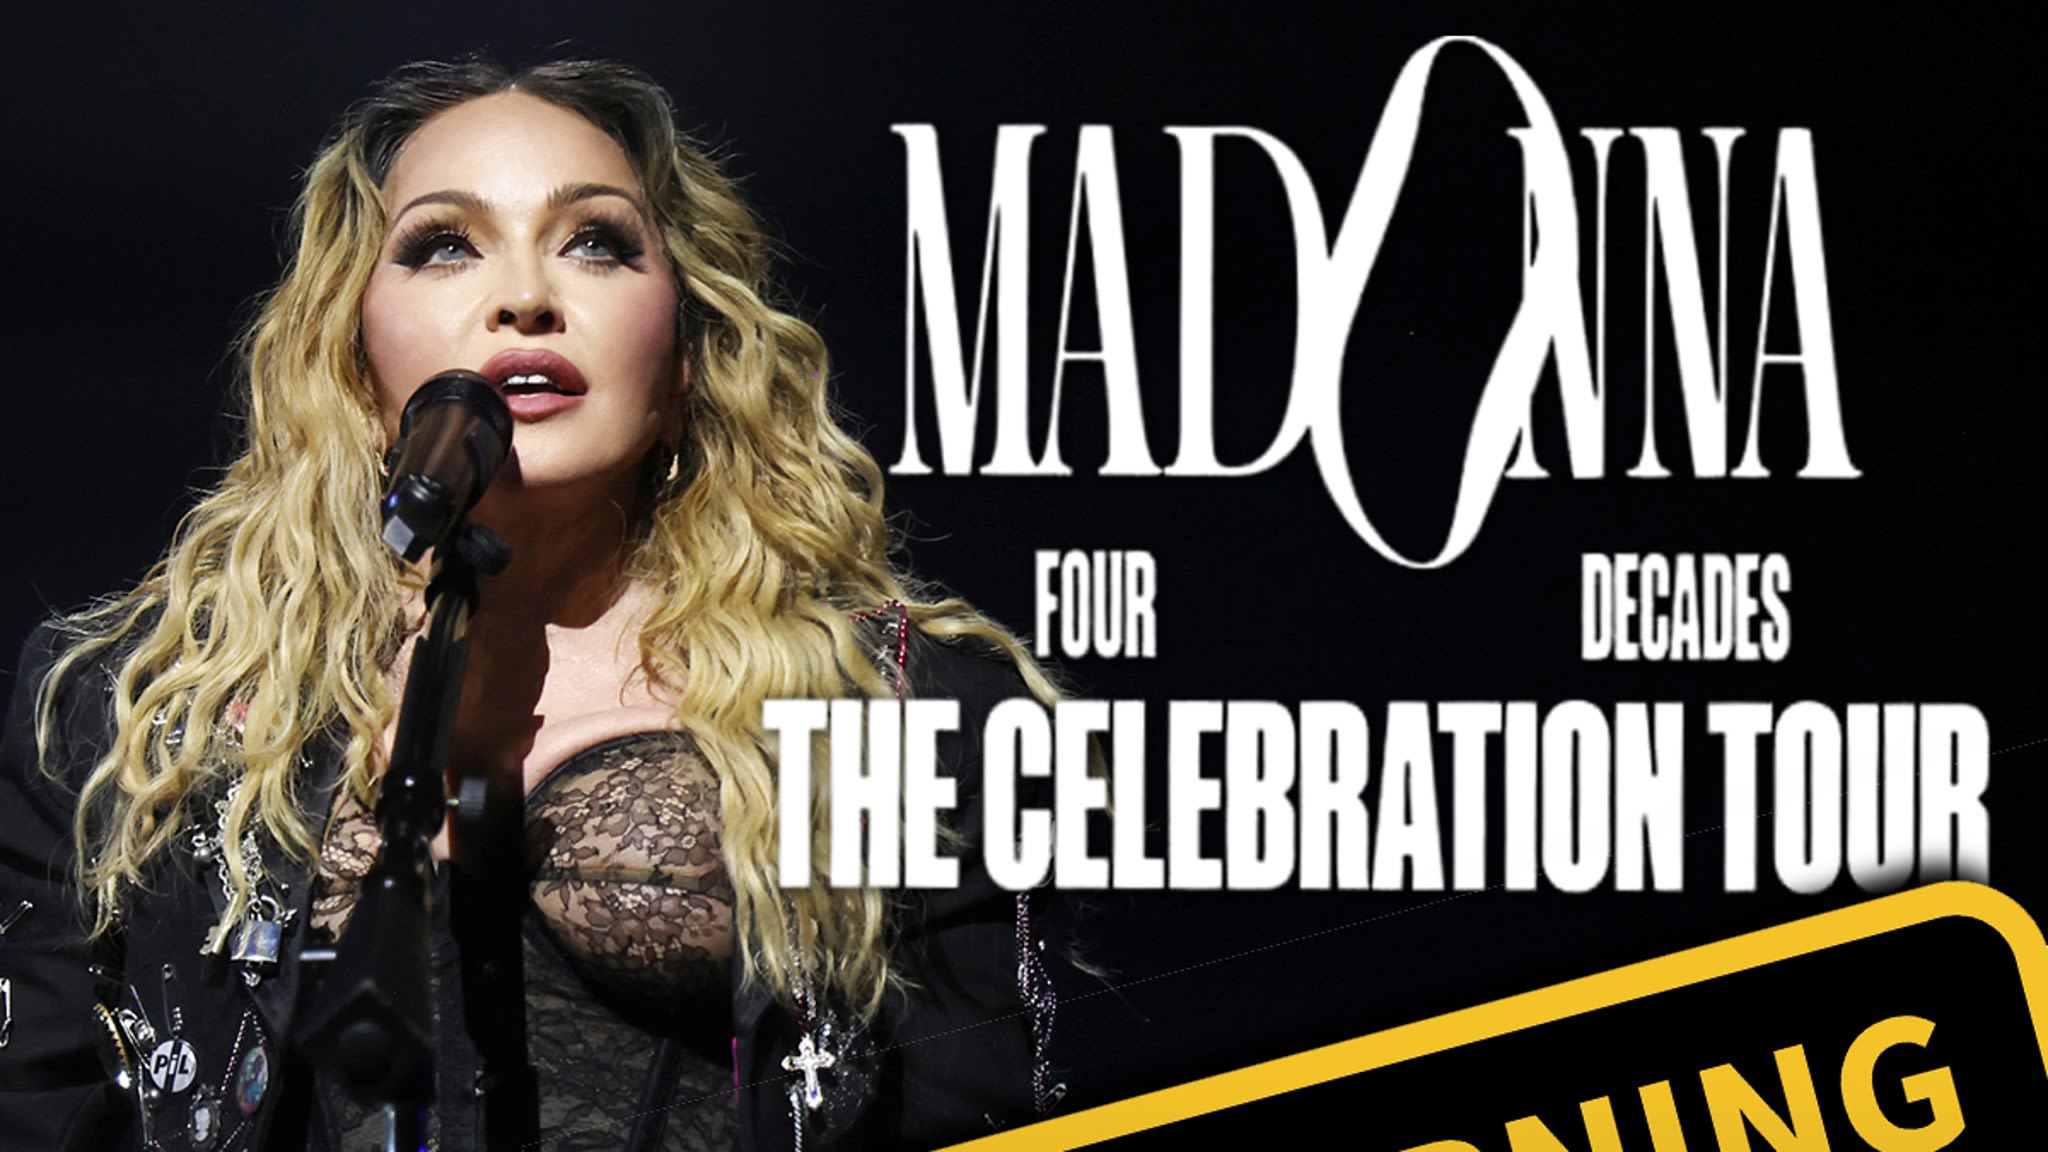 Madonna Sued, Fan Says He Was Forced to Watch Sex Acts During Celebration Tour